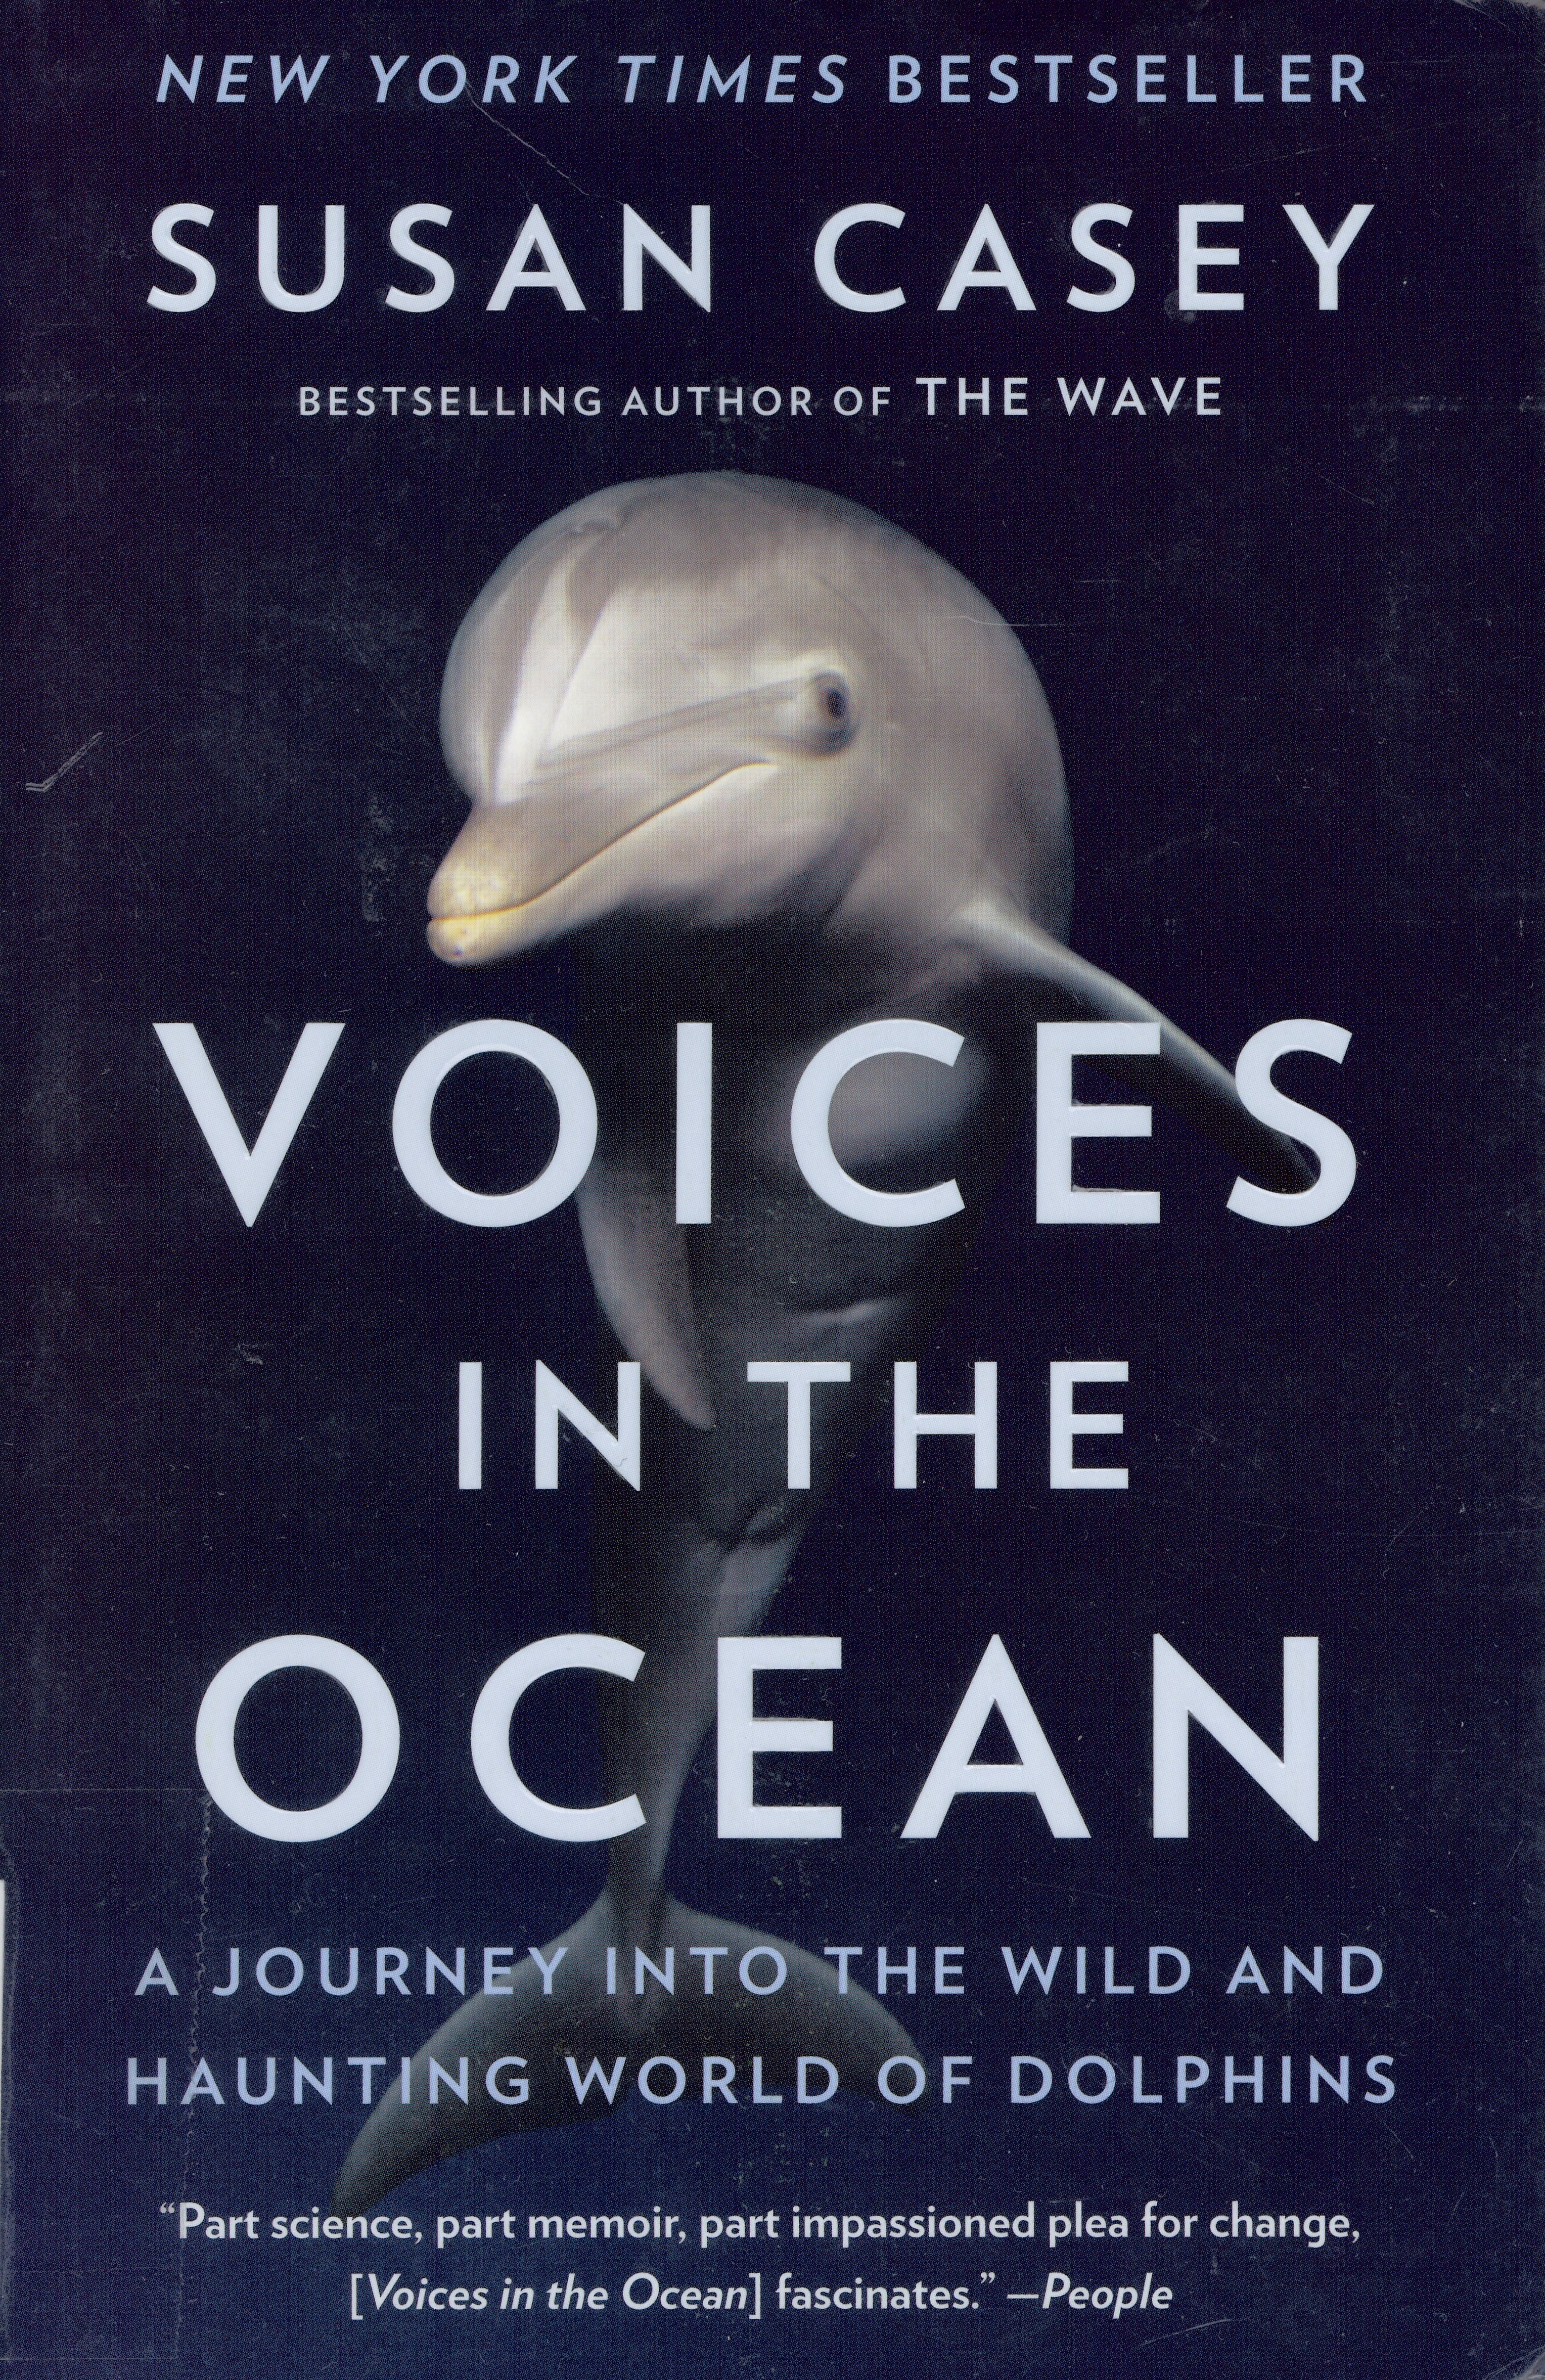 Voices in the ocean : a journey into the wild and haunting world of dolphins